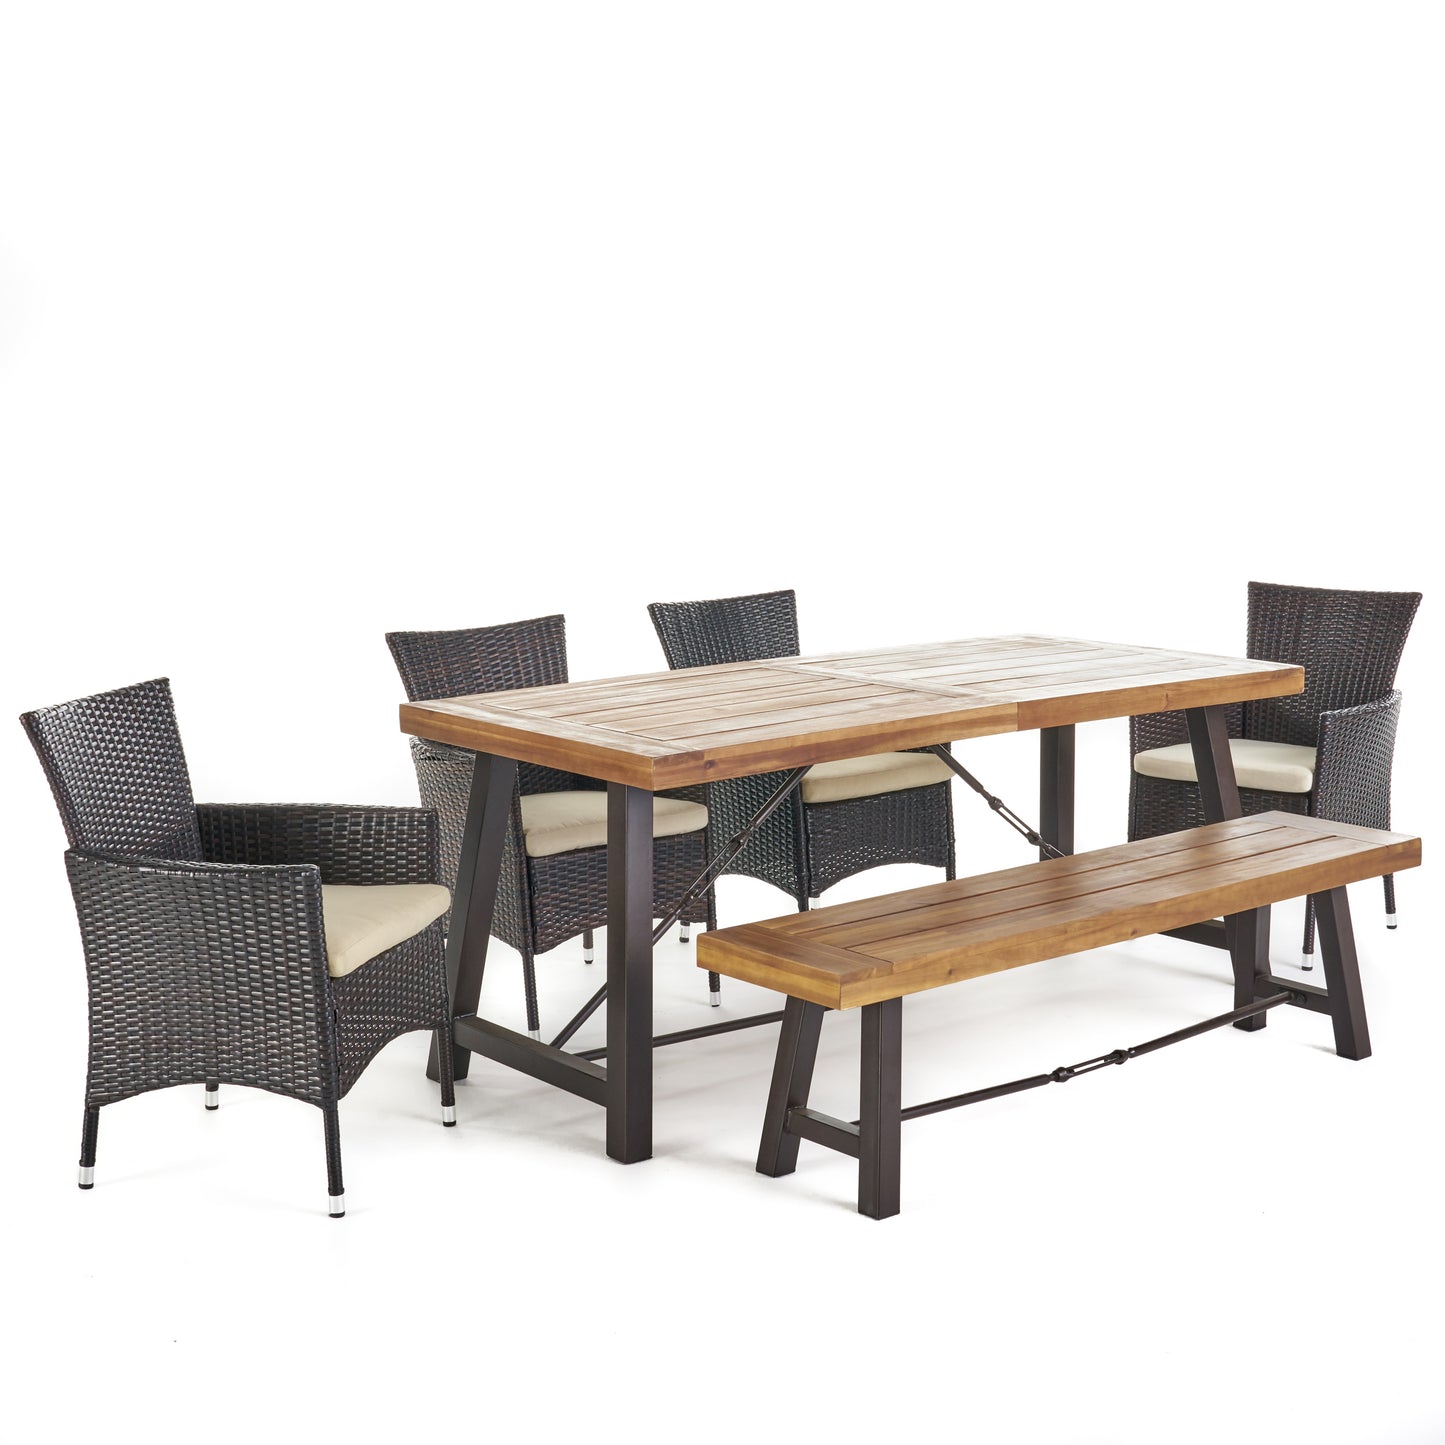 Jenine Outdoor 6 Piece Teak Finished Acacia Wood Dining Set with Multi-brown Dining Chairs